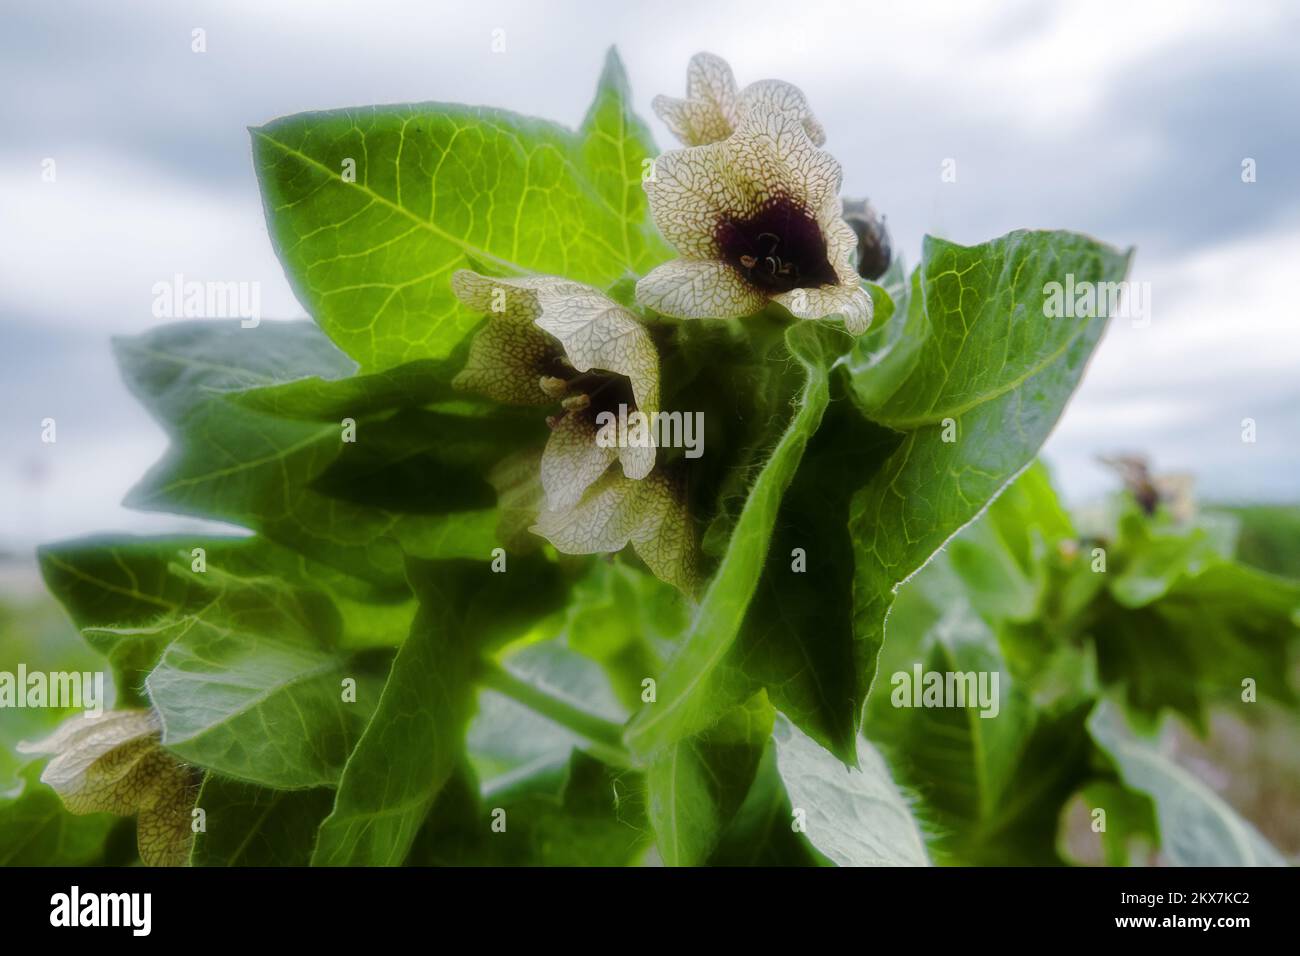 Black henbane (Hyoscyamus niger). Photos flowering plant in the counter after the rain. Elegant grid flower with black and blue throat, but dangerousl Stock Photo